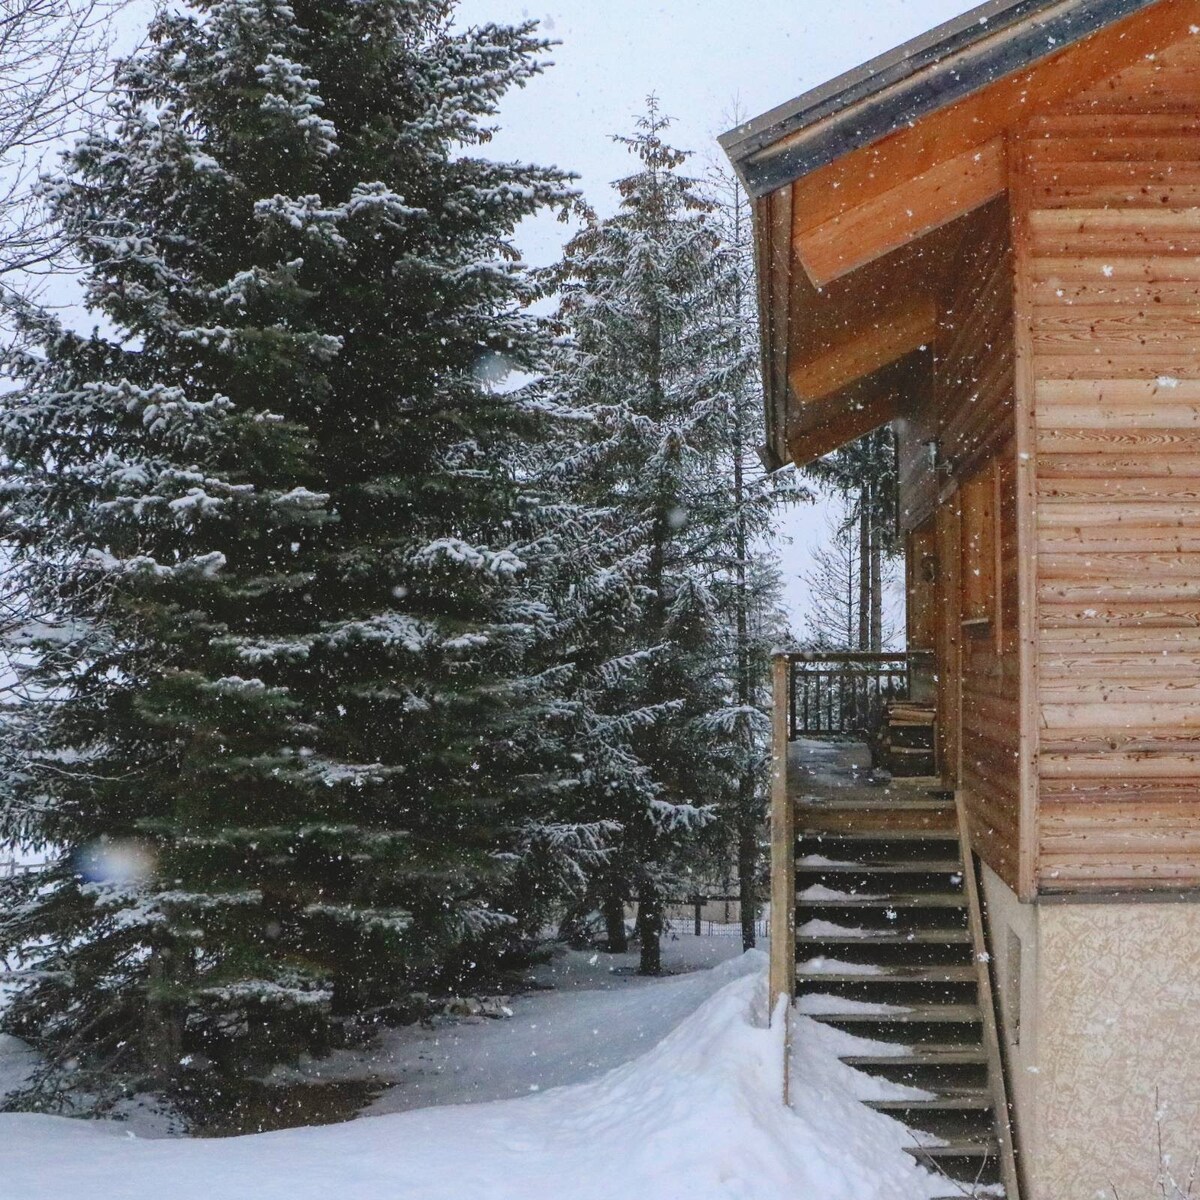 Chalet Edelweiss 3* Serre Chevalier 1500 (10 pers)